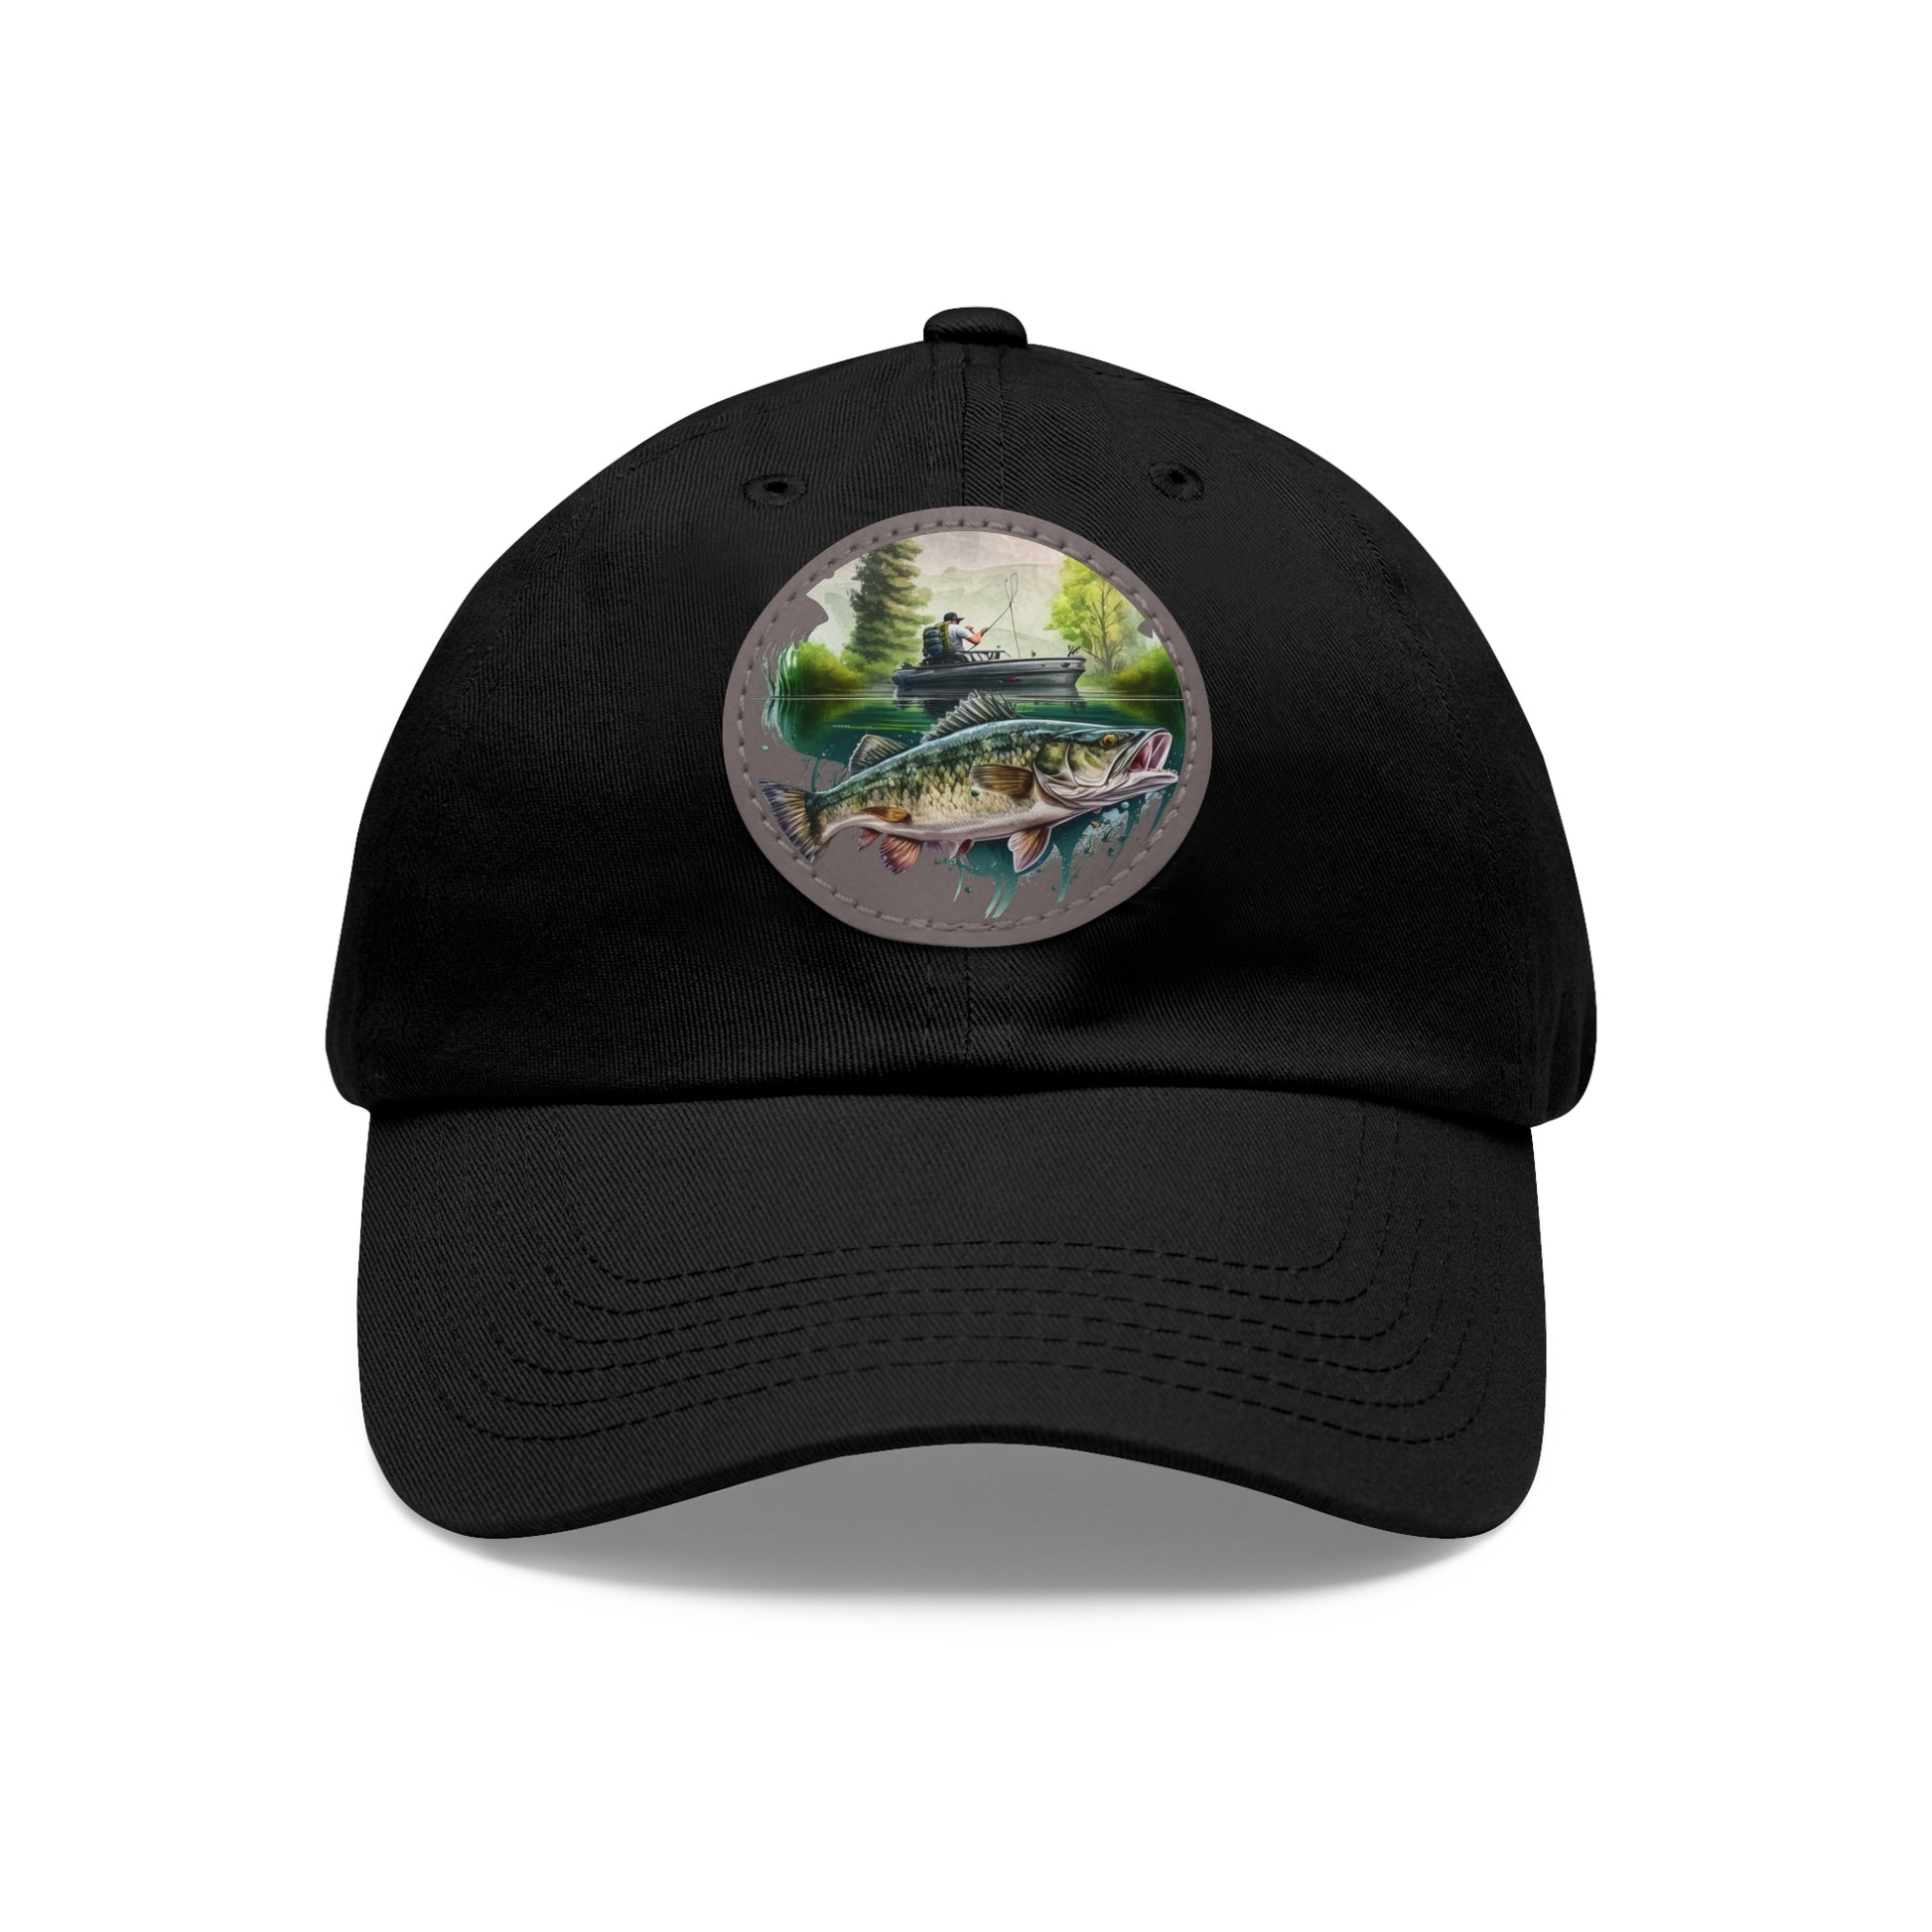 There's Always a Bigger Fish Dad Hat with Leather Patch, white hat fea –  Finger Lakes Online Store